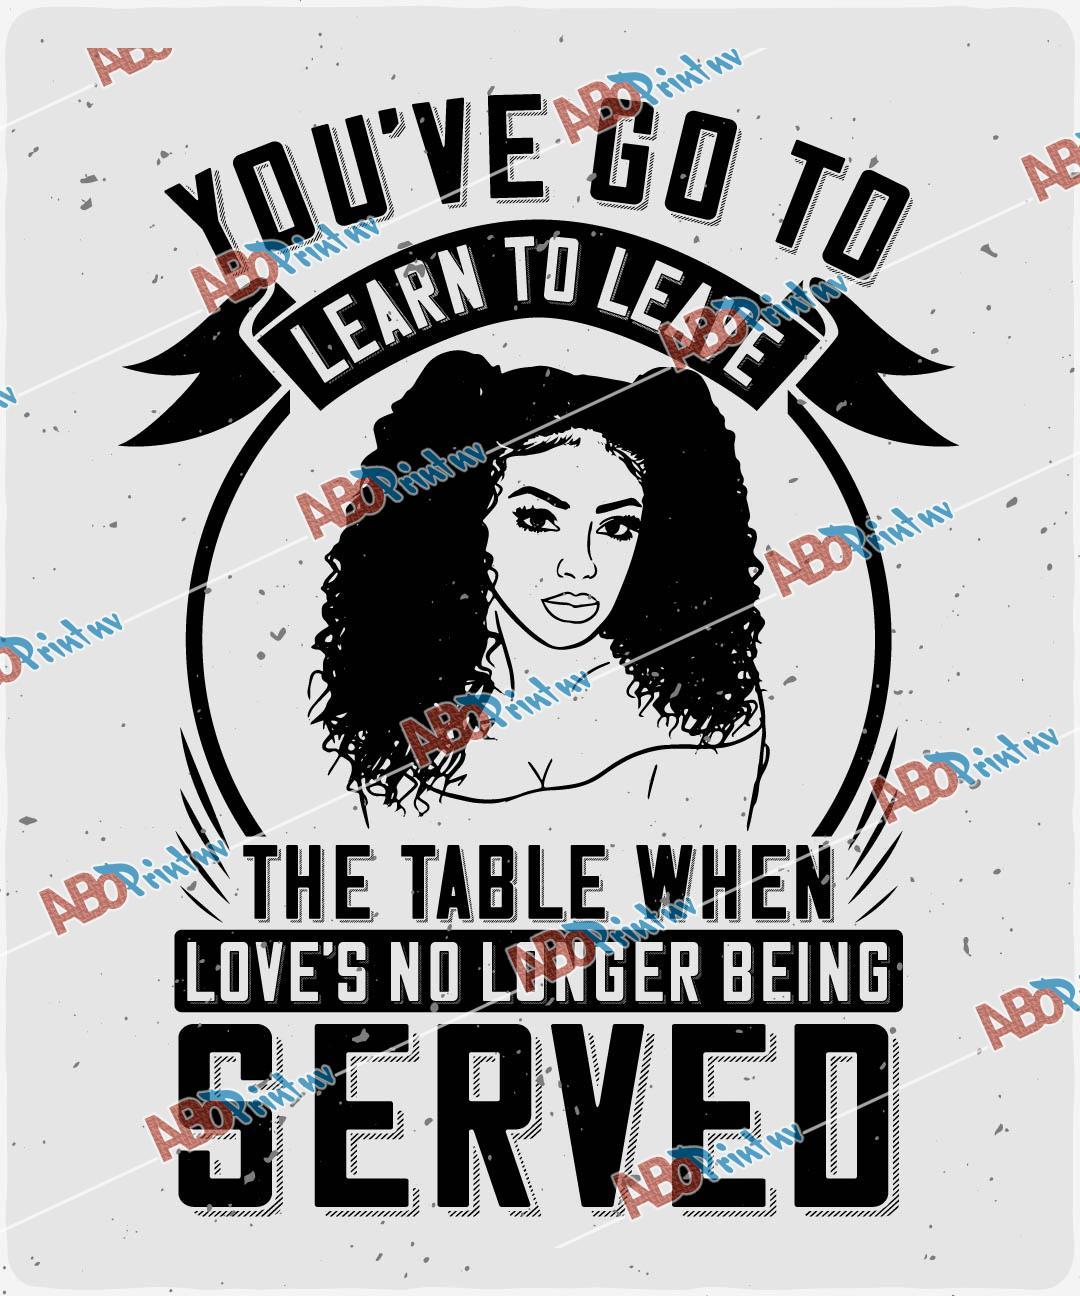 You've got to learn to leave the table when love's no longer being served 2.jpg